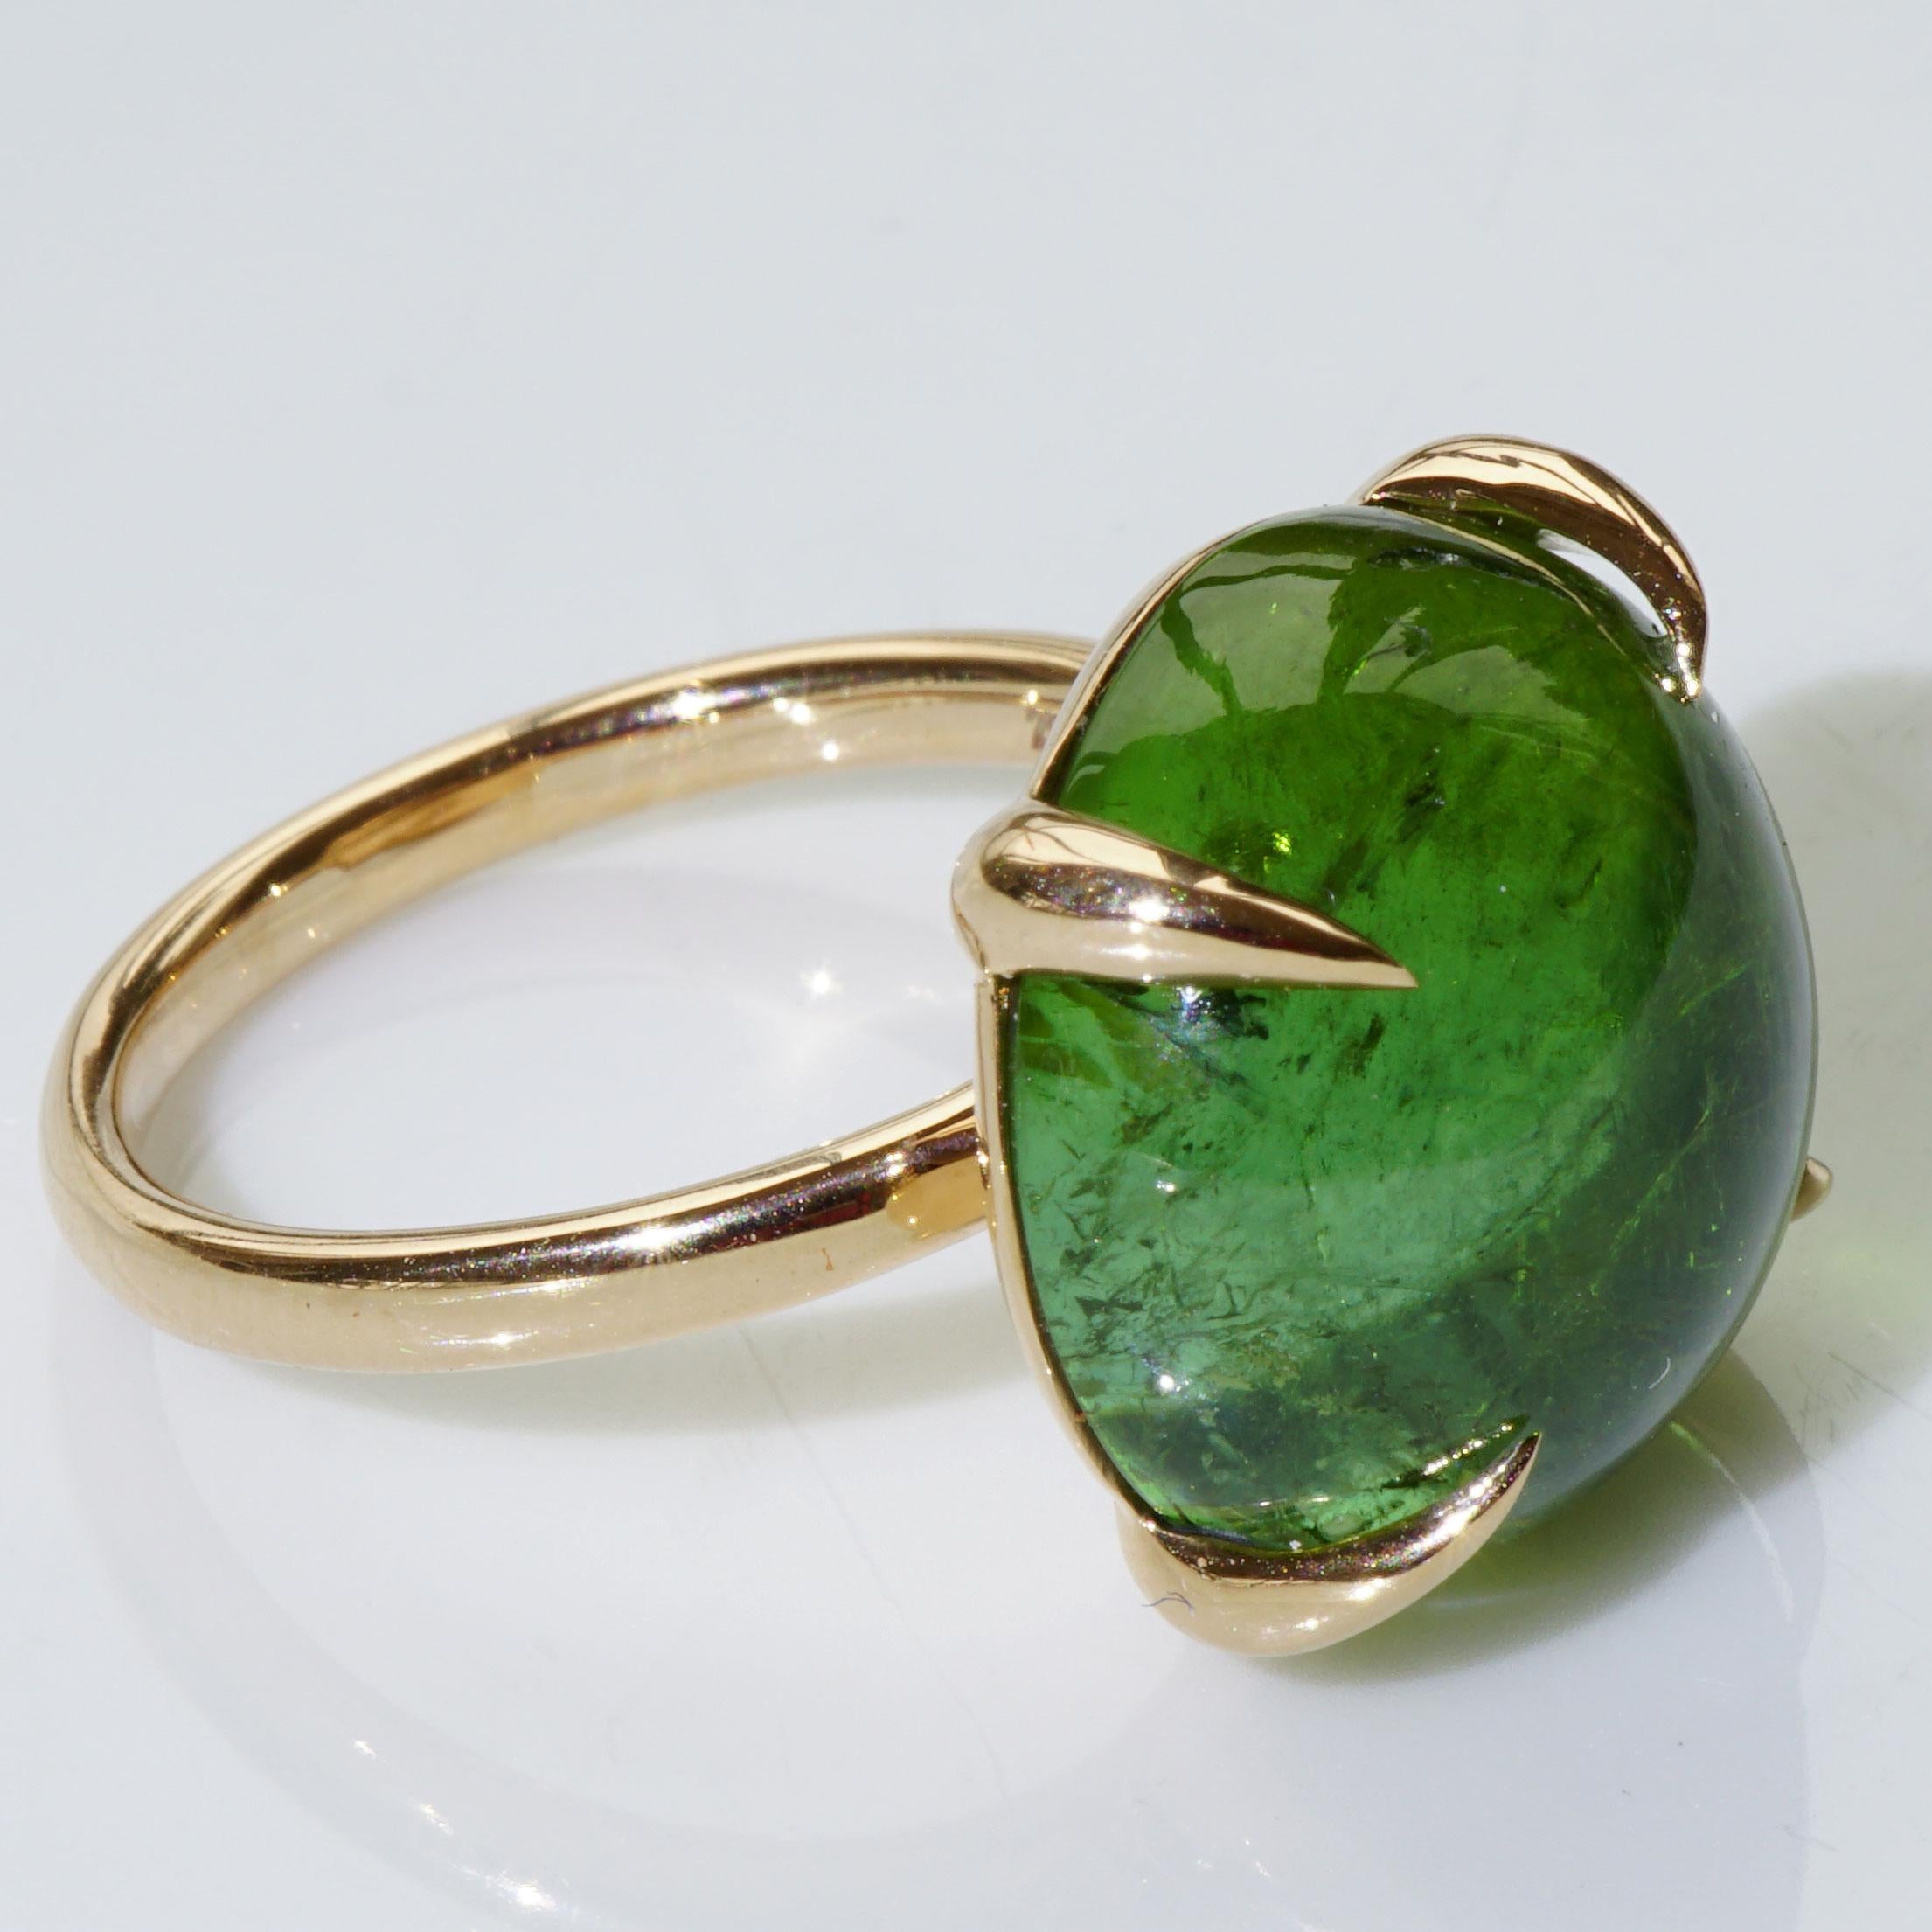 Cabochon Green-Blue Tourmalin Bubble Ring Rose Gold 16 Ct Made by Italian Goldsmith Co.